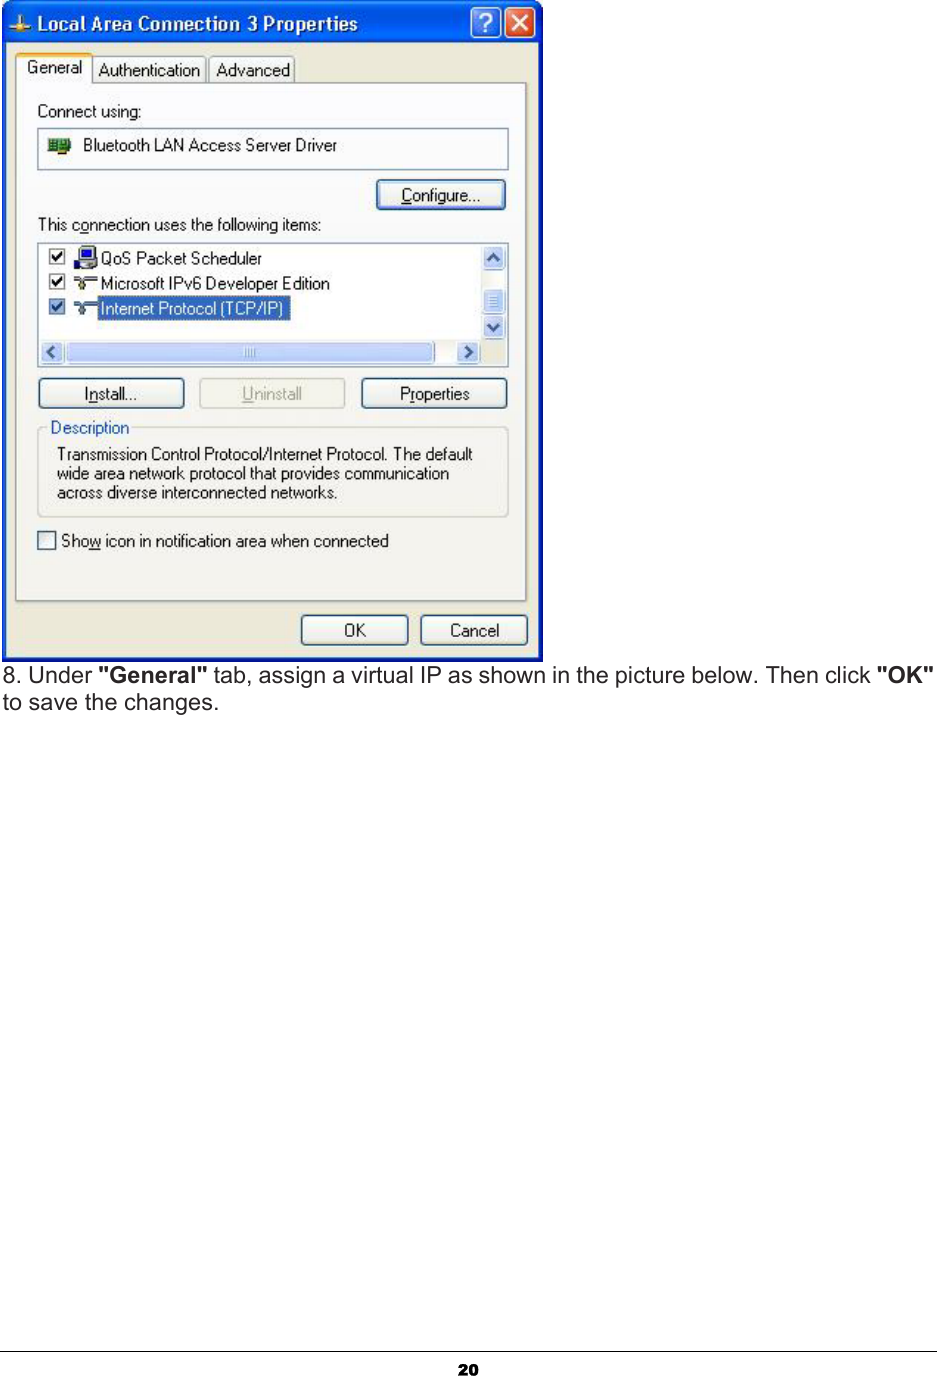   20 8. Under &quot;General&quot; tab, assign a virtual IP as shown in the picture below. Then click &quot;OK&quot; to save the changes. 